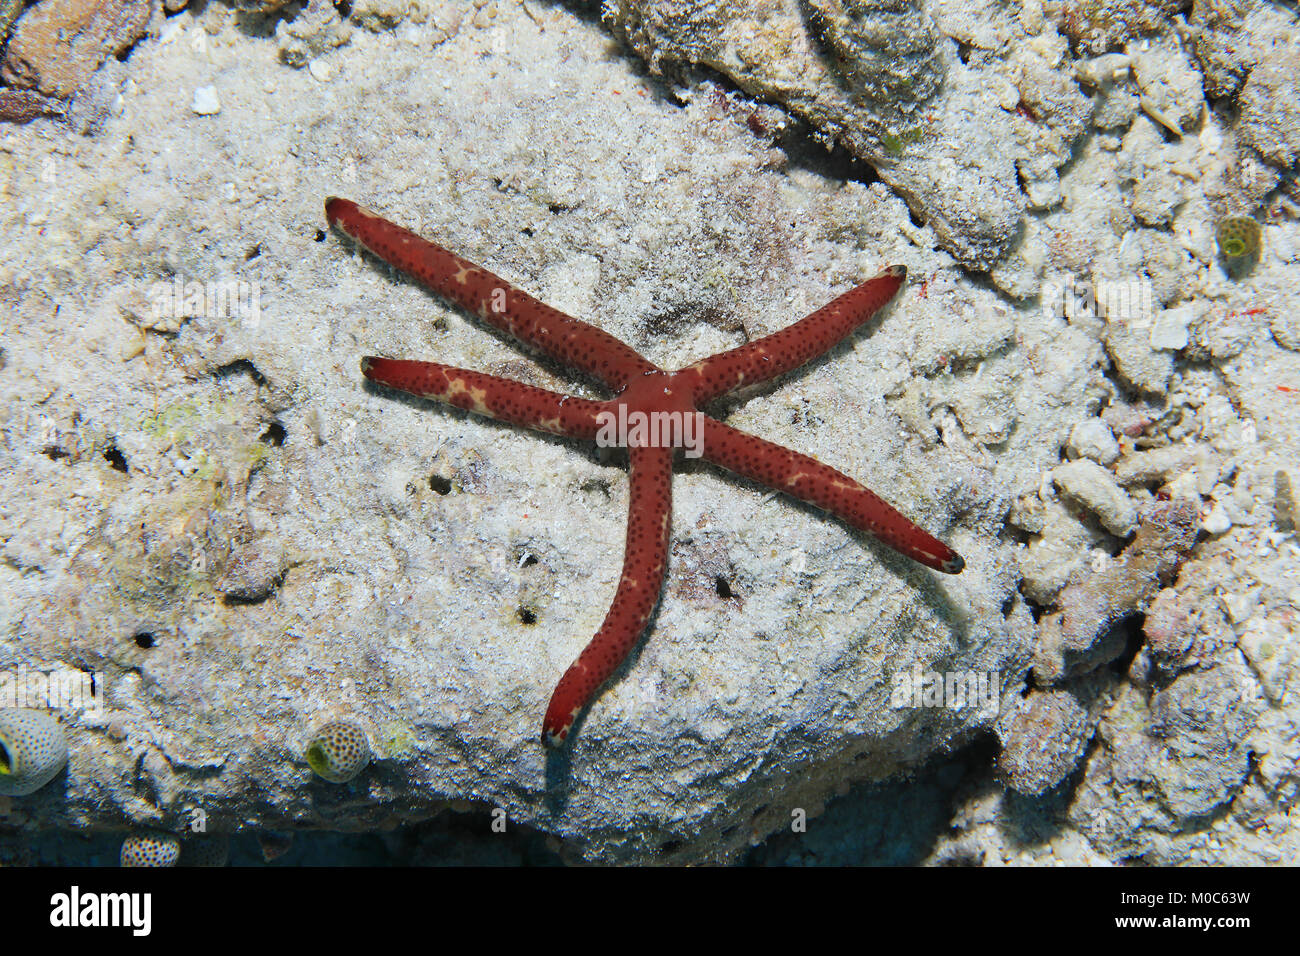 Spotted linckia sea star (Linckia multifora) underwater in the tropical coral reef of the indian ocean Stock Photo